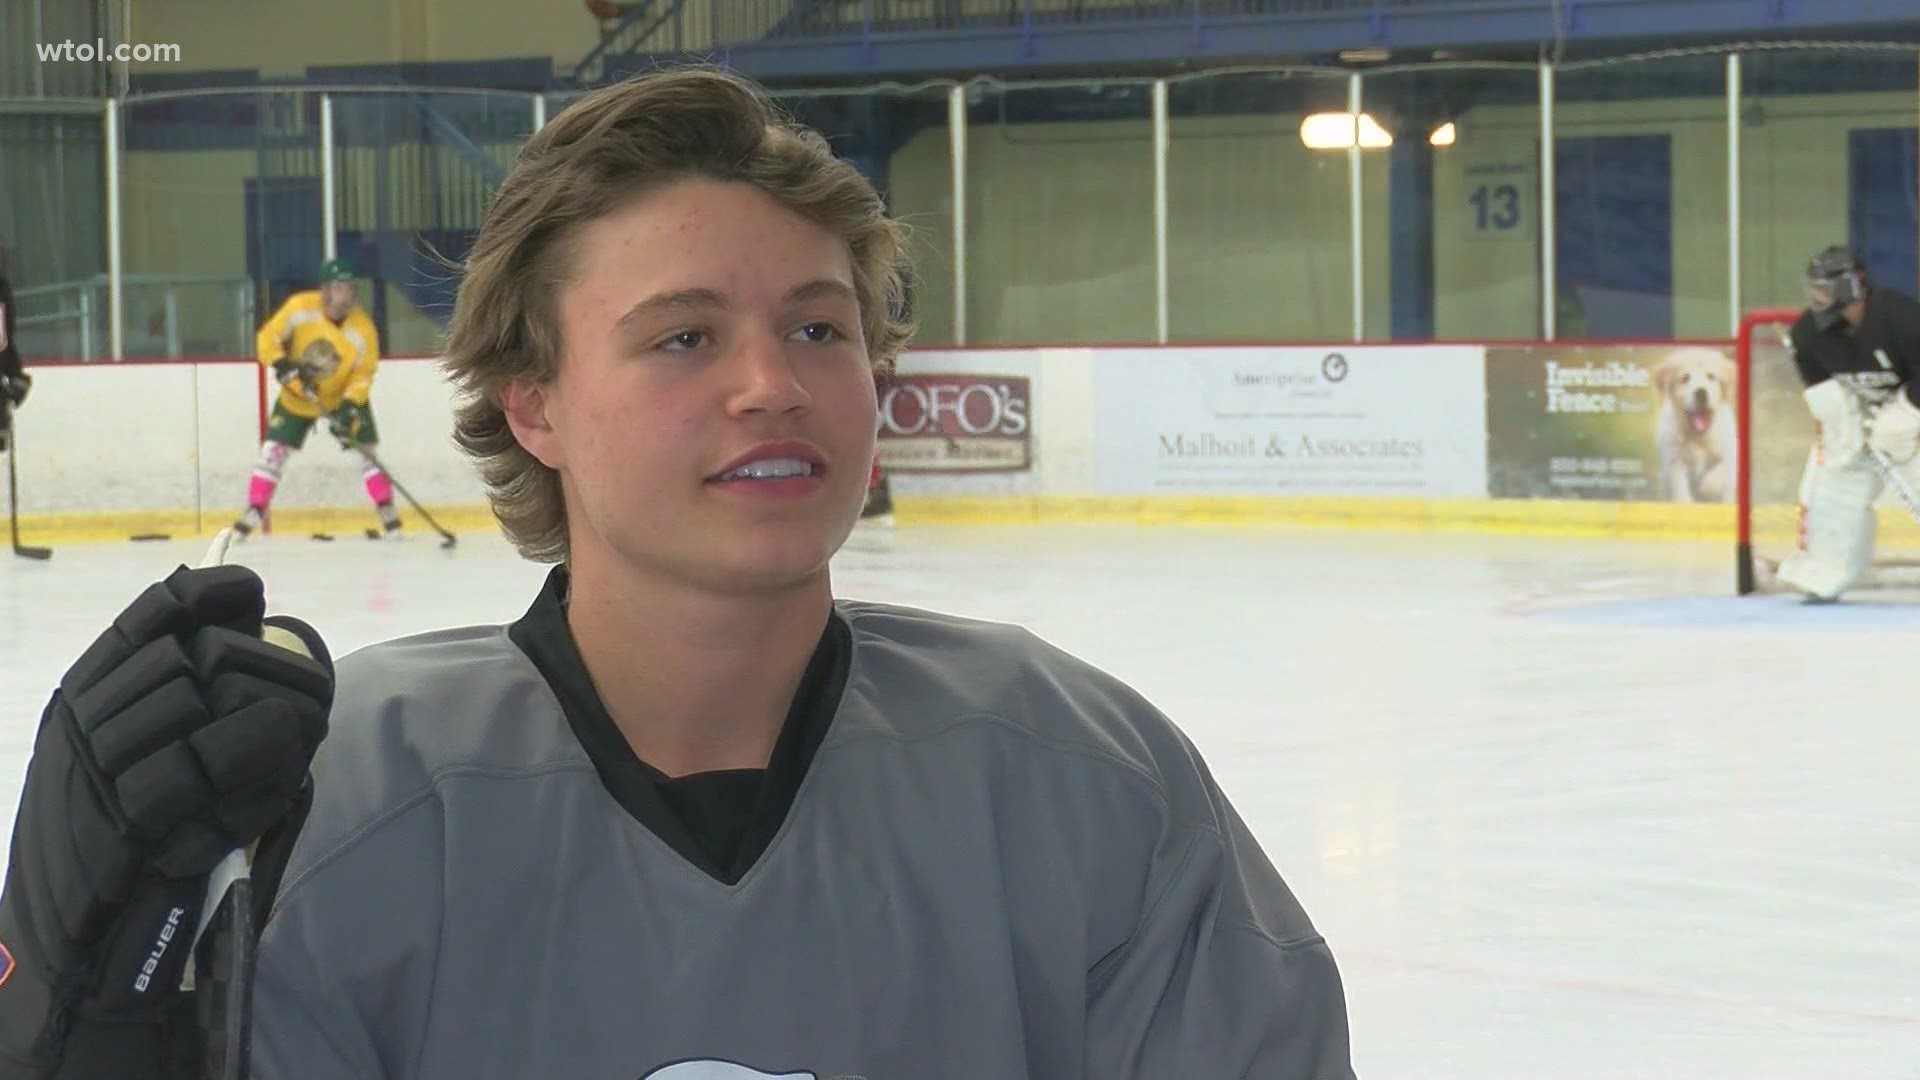 The Maumee native with an already impressive young career has a bright hockey future ahead.